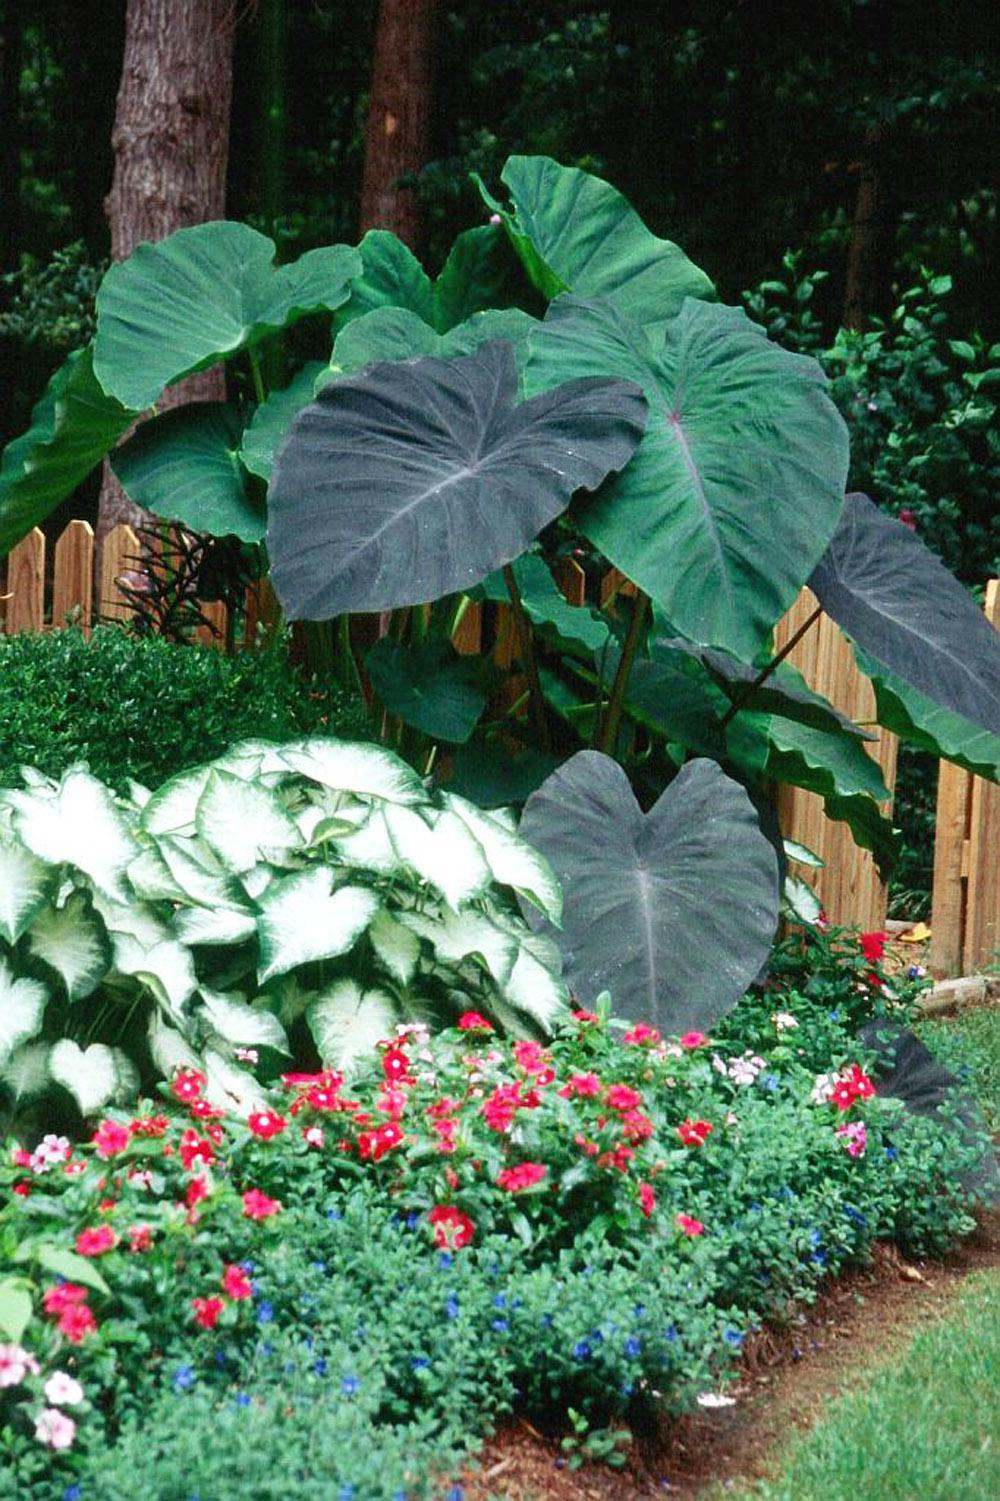 With huge, lush foliage, Black Magic elephant ears make an everyday garden look like the West Indies.